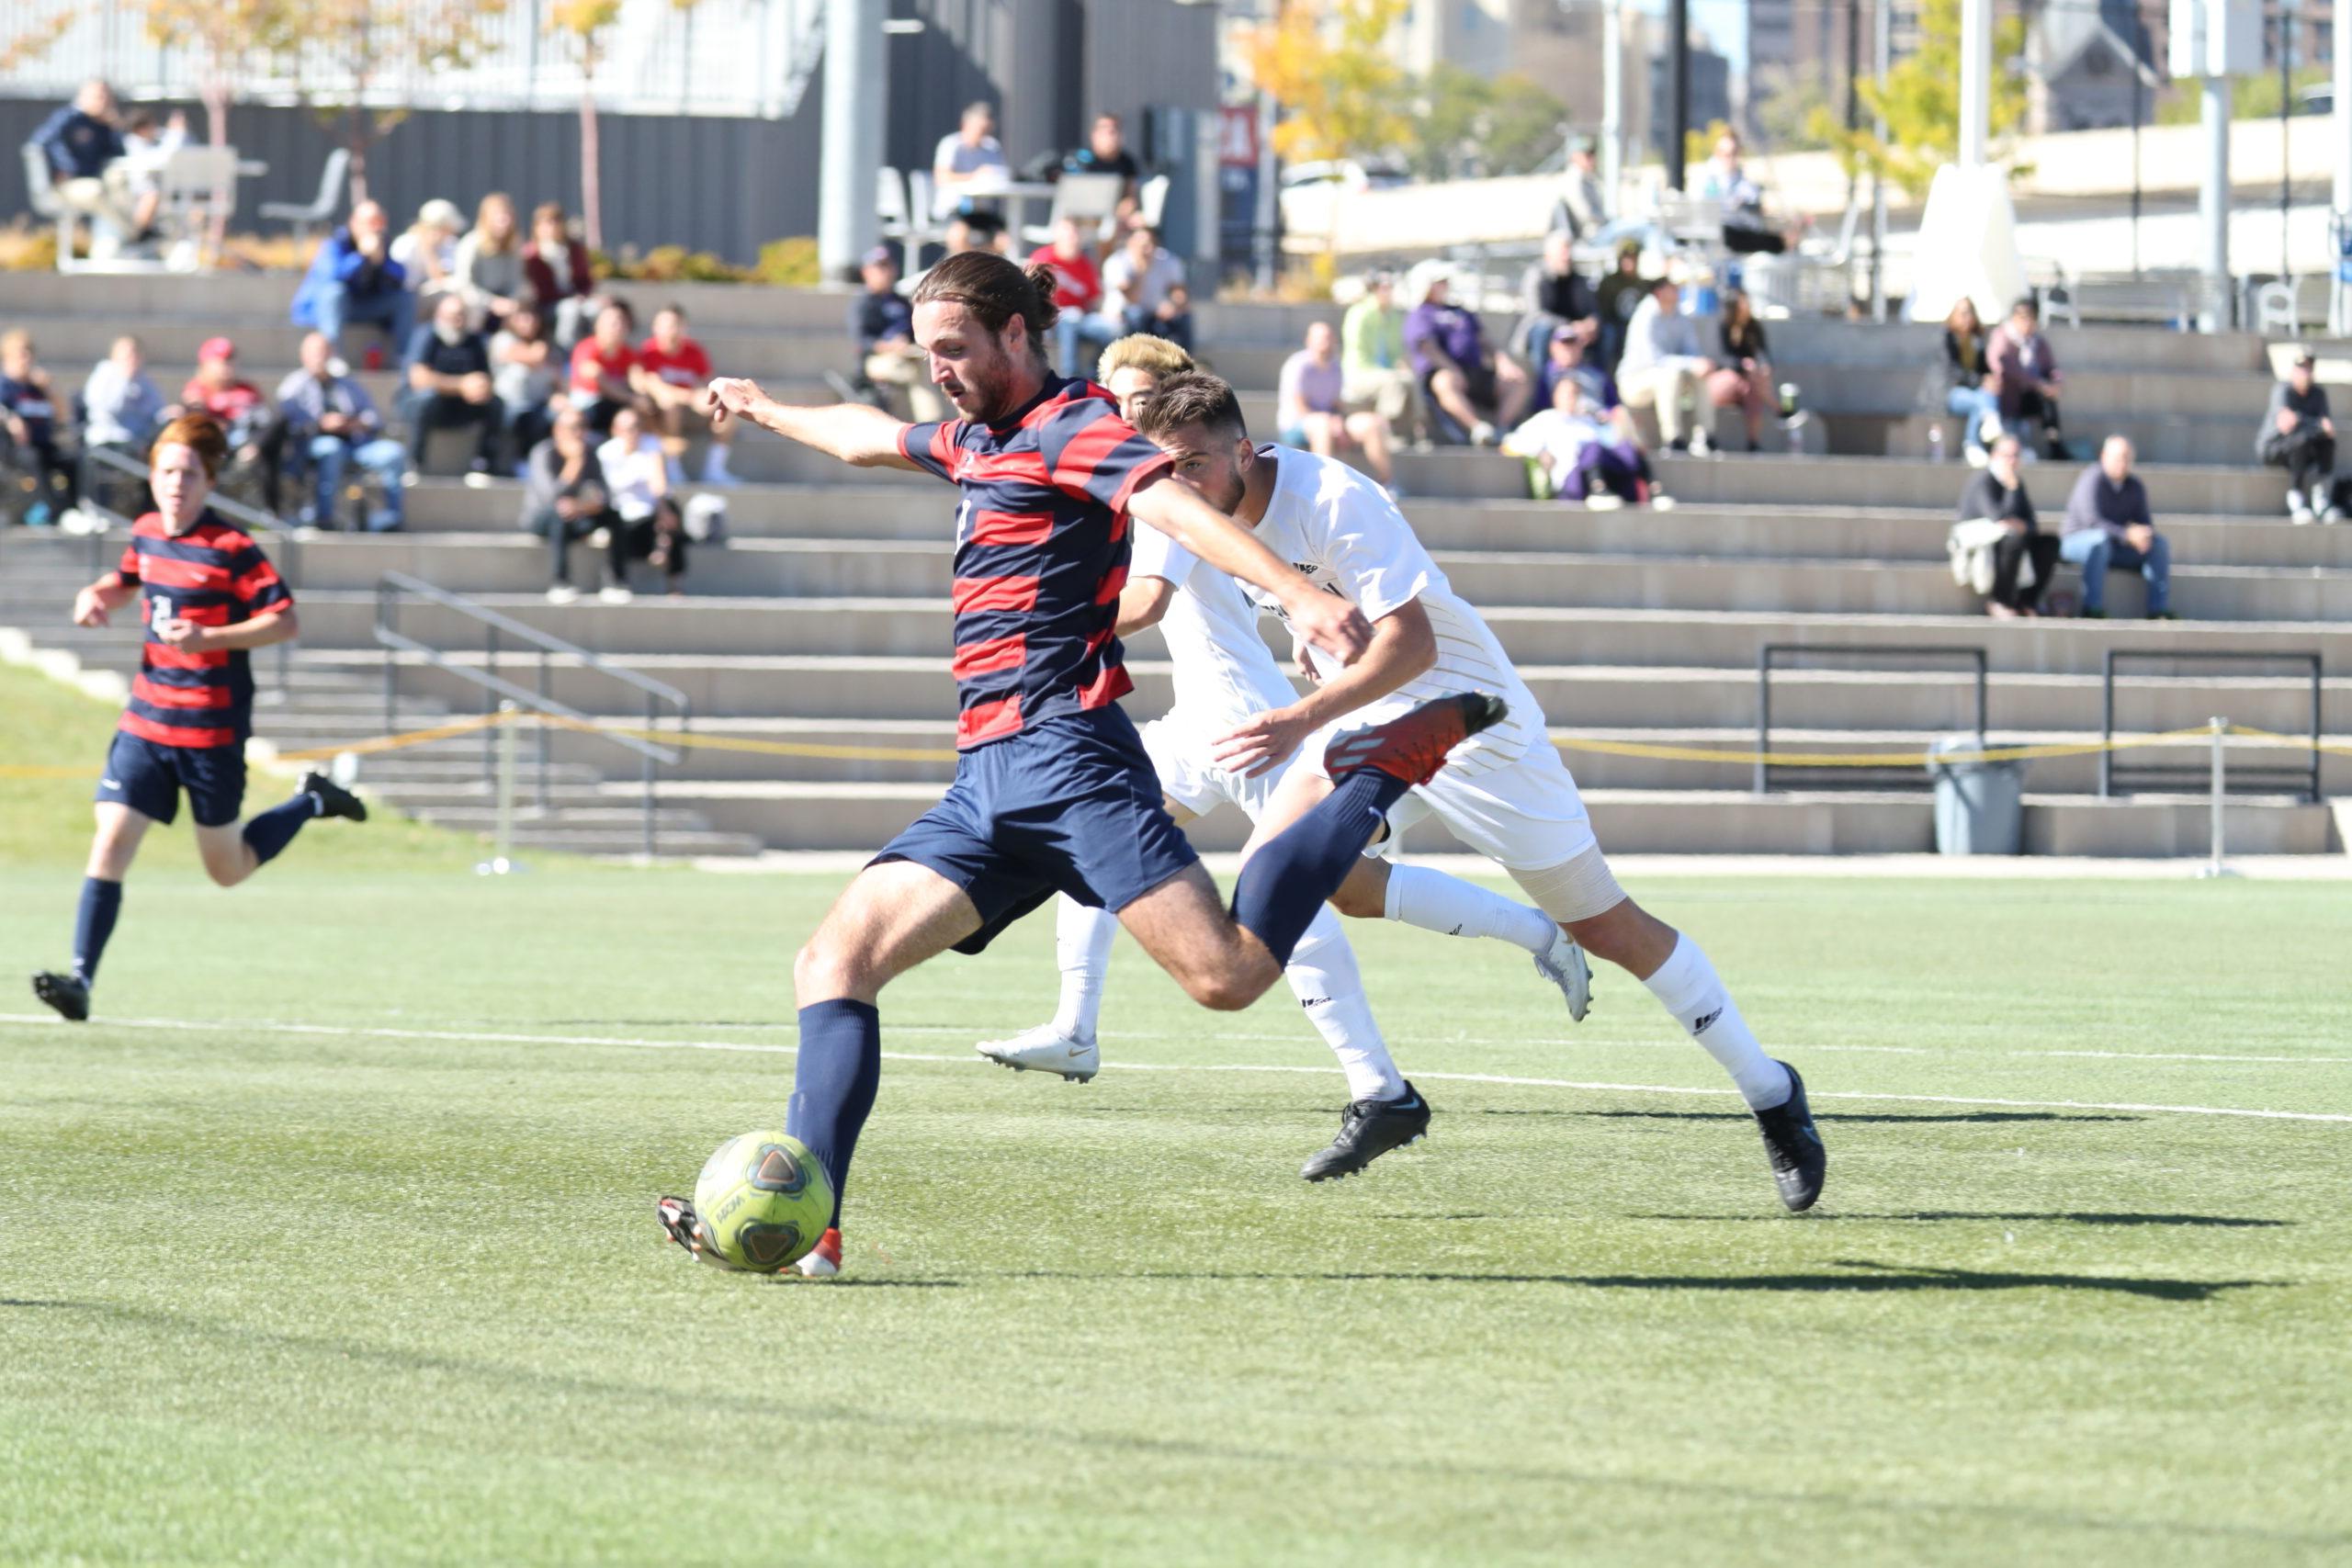 Men's soccer player Aidan Bates sets up for a shot during a game in 2021 with the Roadrunners crowd in the background.